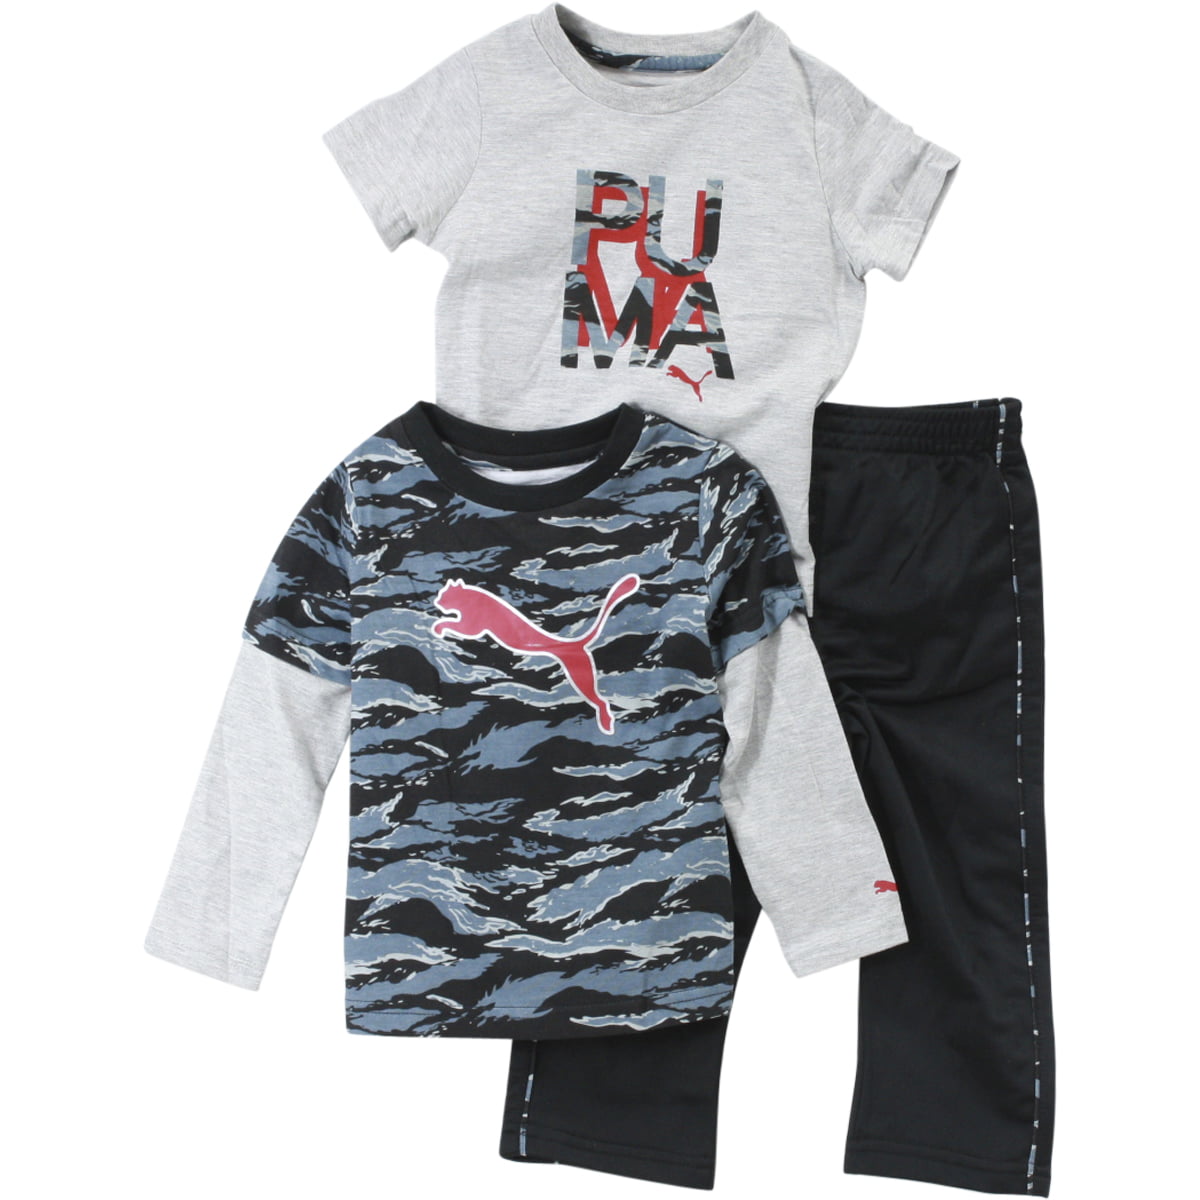 puma baby outfits